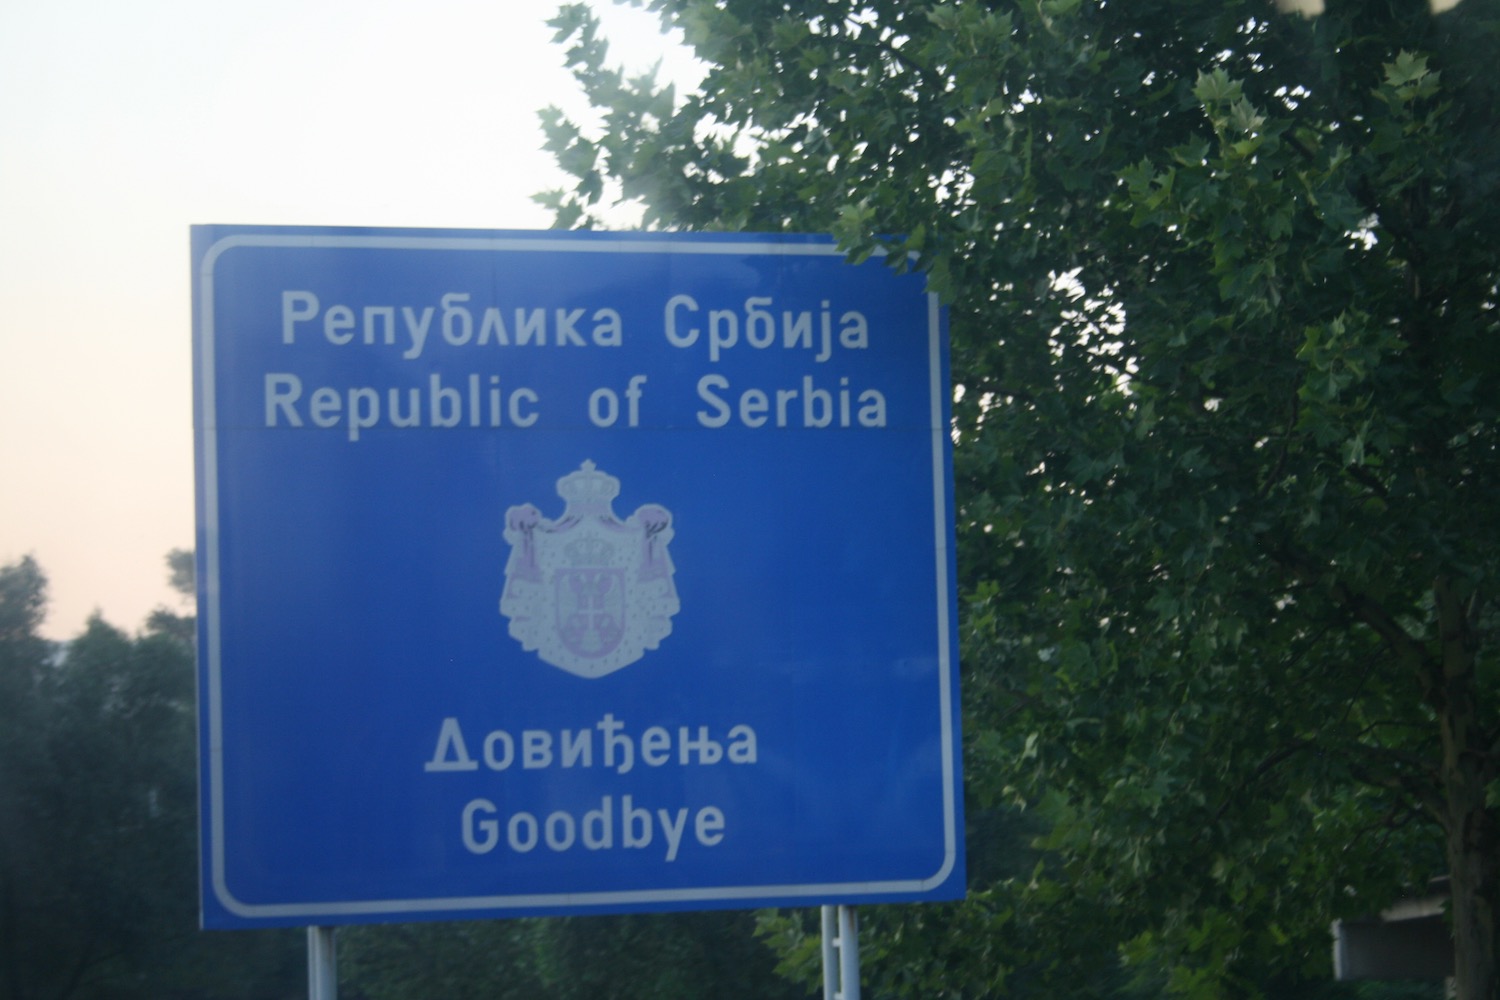 a blue sign with white text and a coat of arms on it